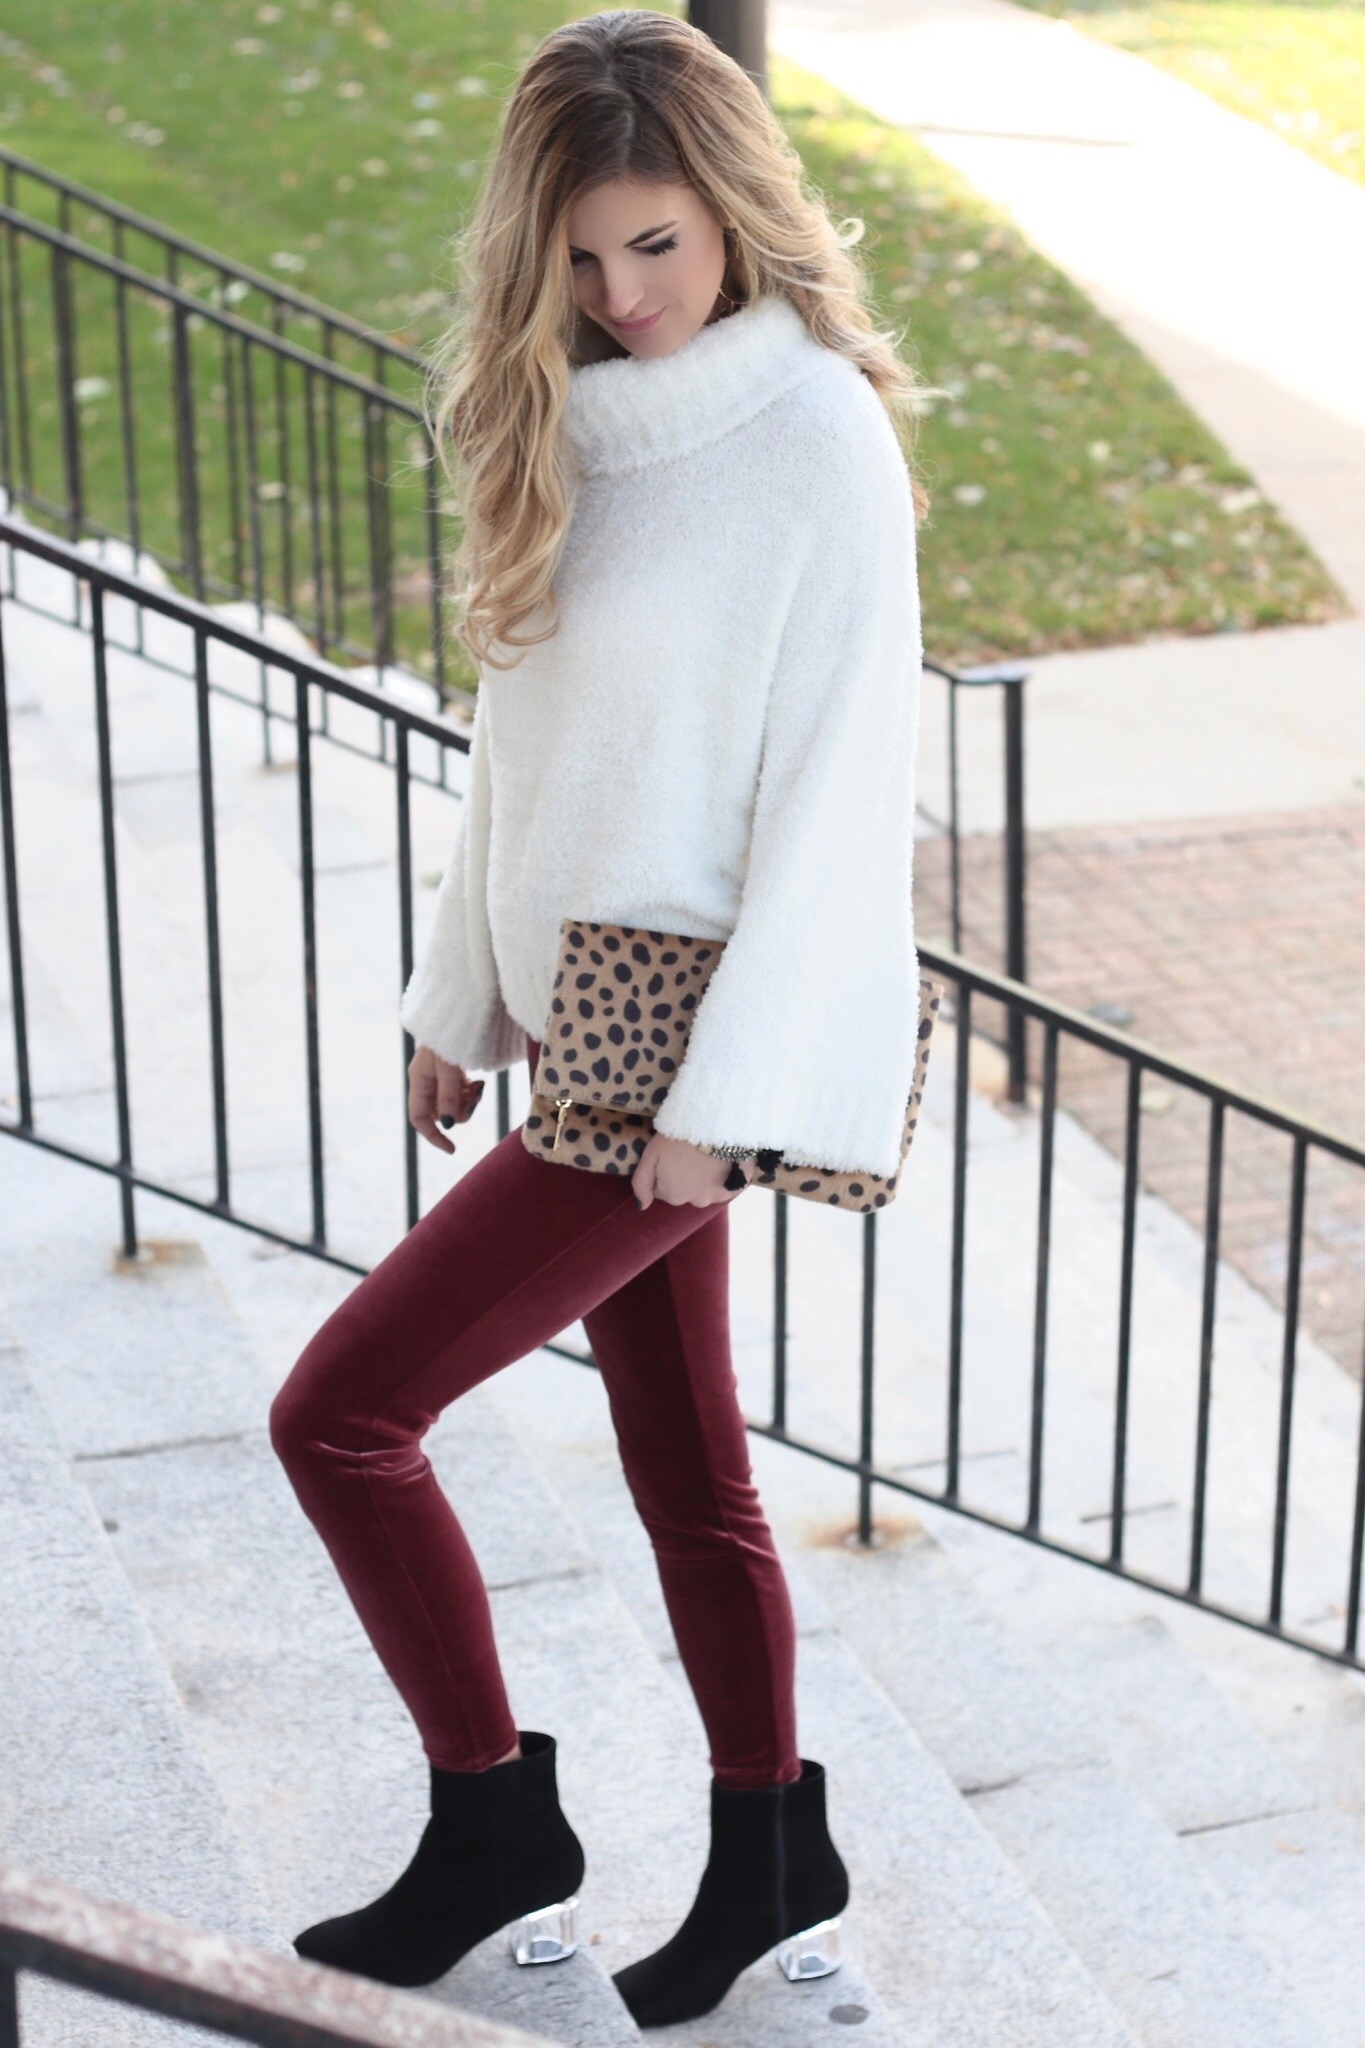 Cobalt Blue Sweater, Black leggings with brown boots  How to wear leggings,  Casual winter outfits, Outfits with leggings